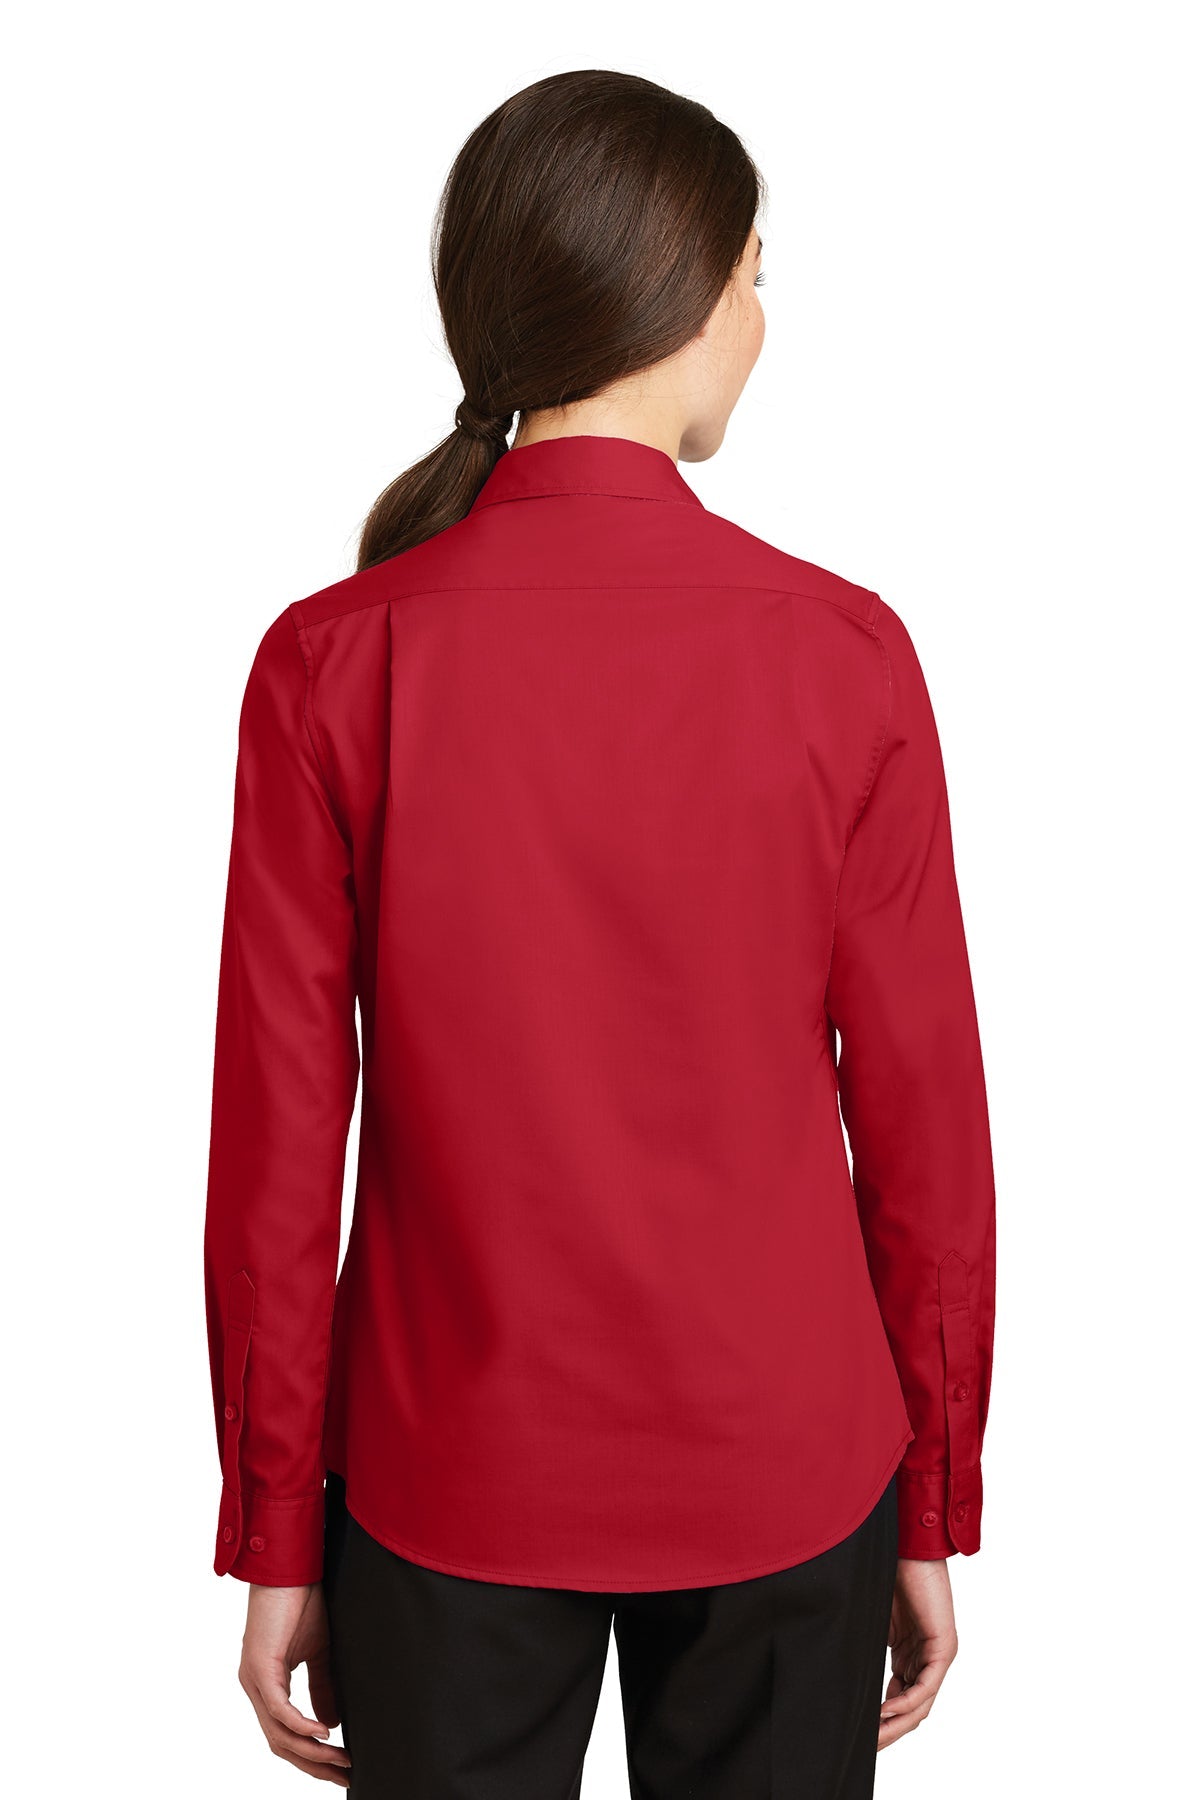 port authority_l663 _rich red_company_logo_button downs